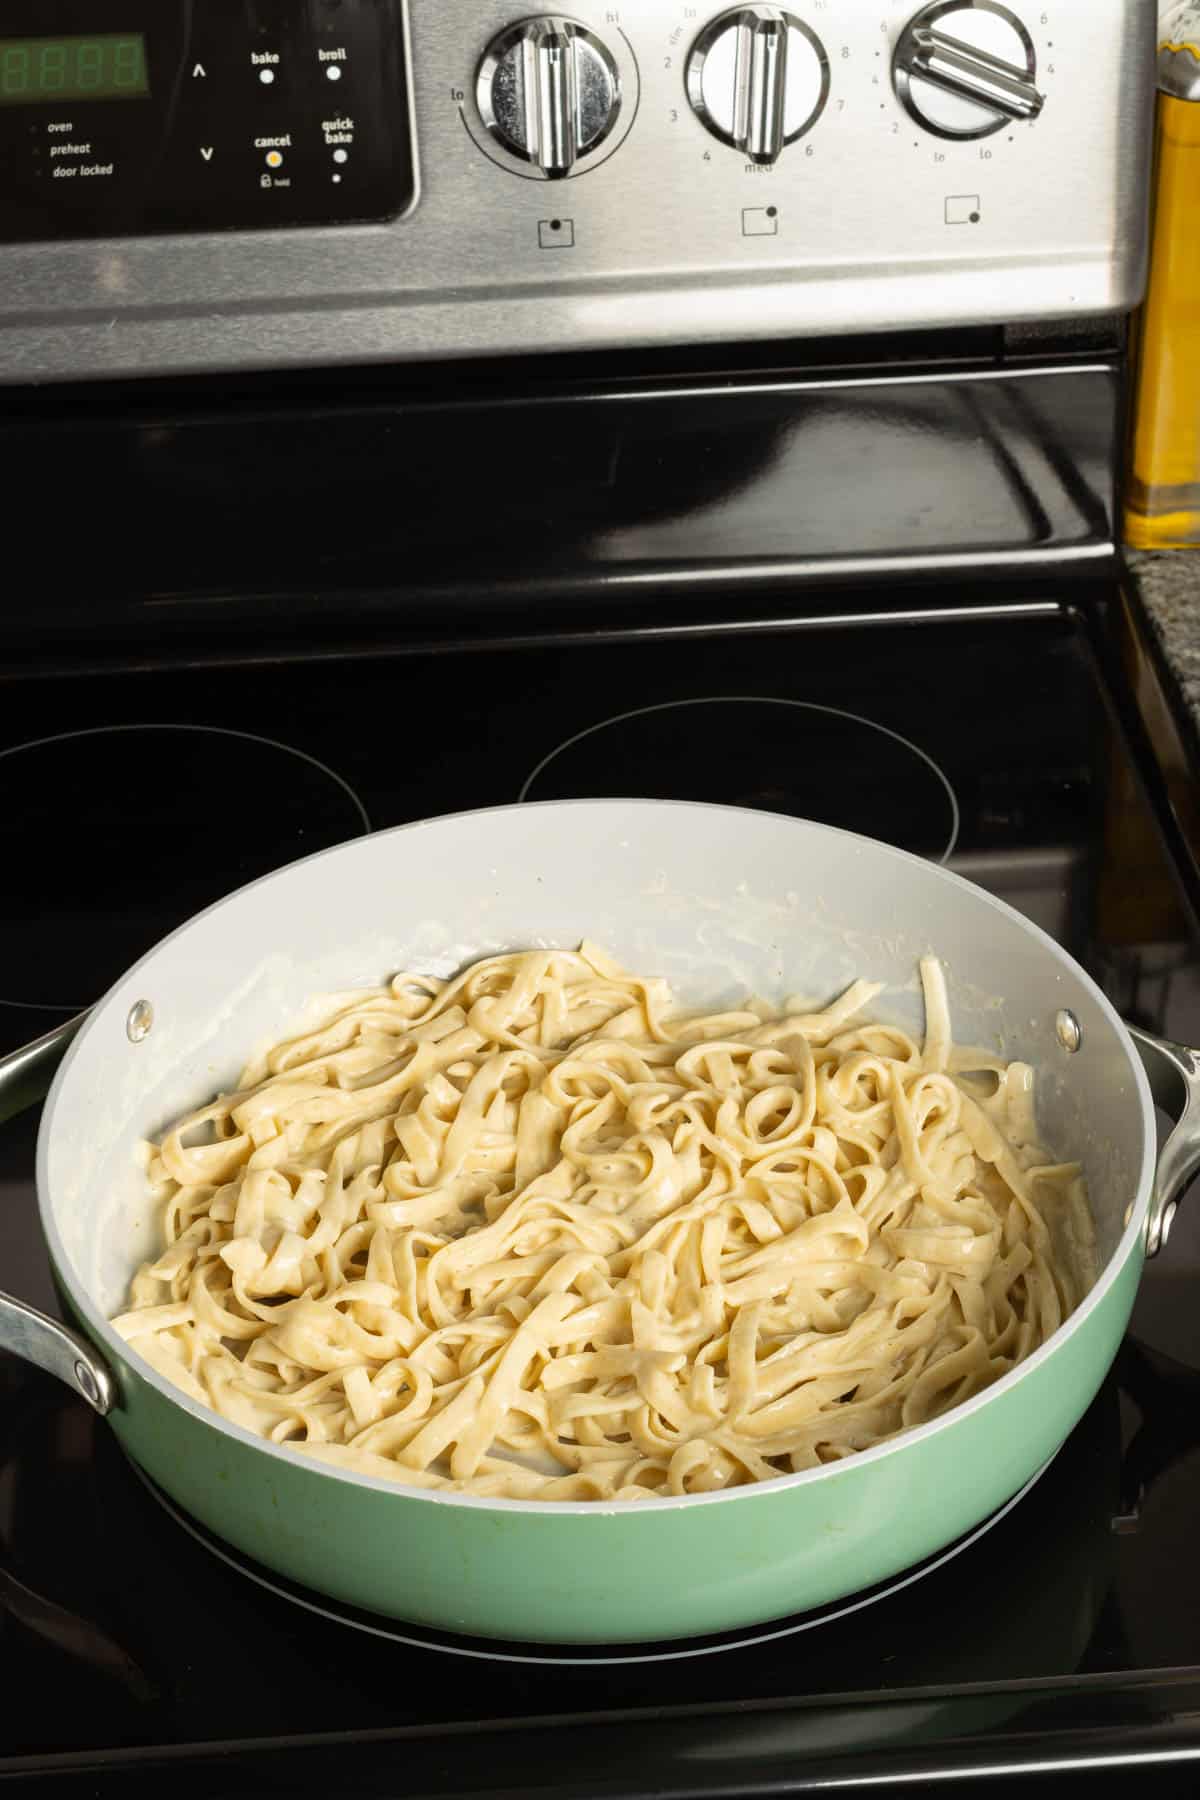 A pan full of fettuccine alfredo on the stove.